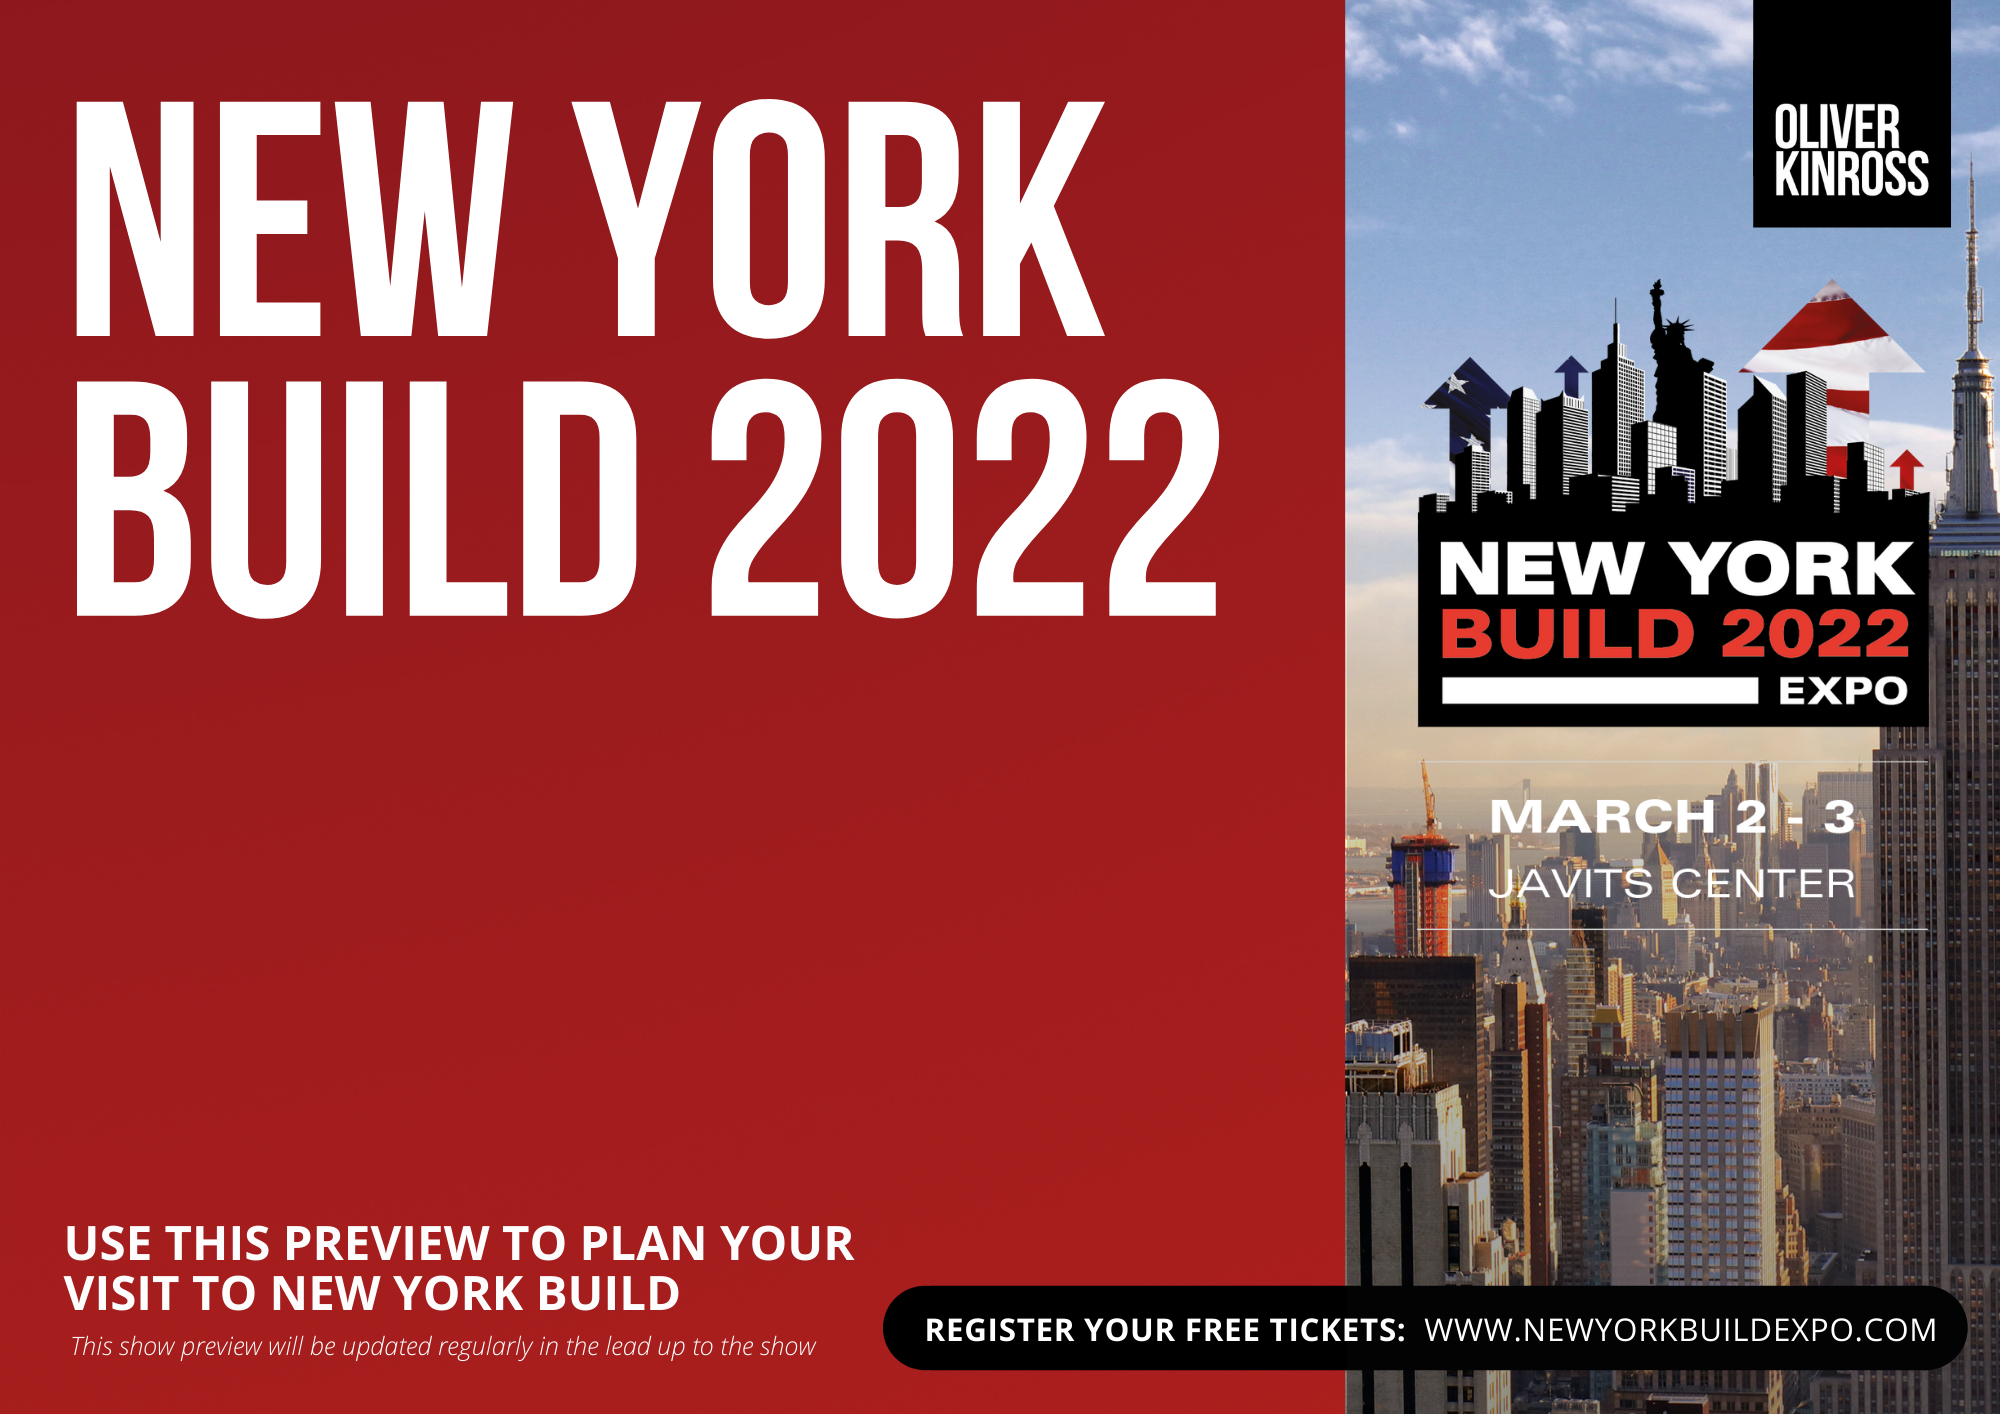 New York Build’s Show Preview Now Live!